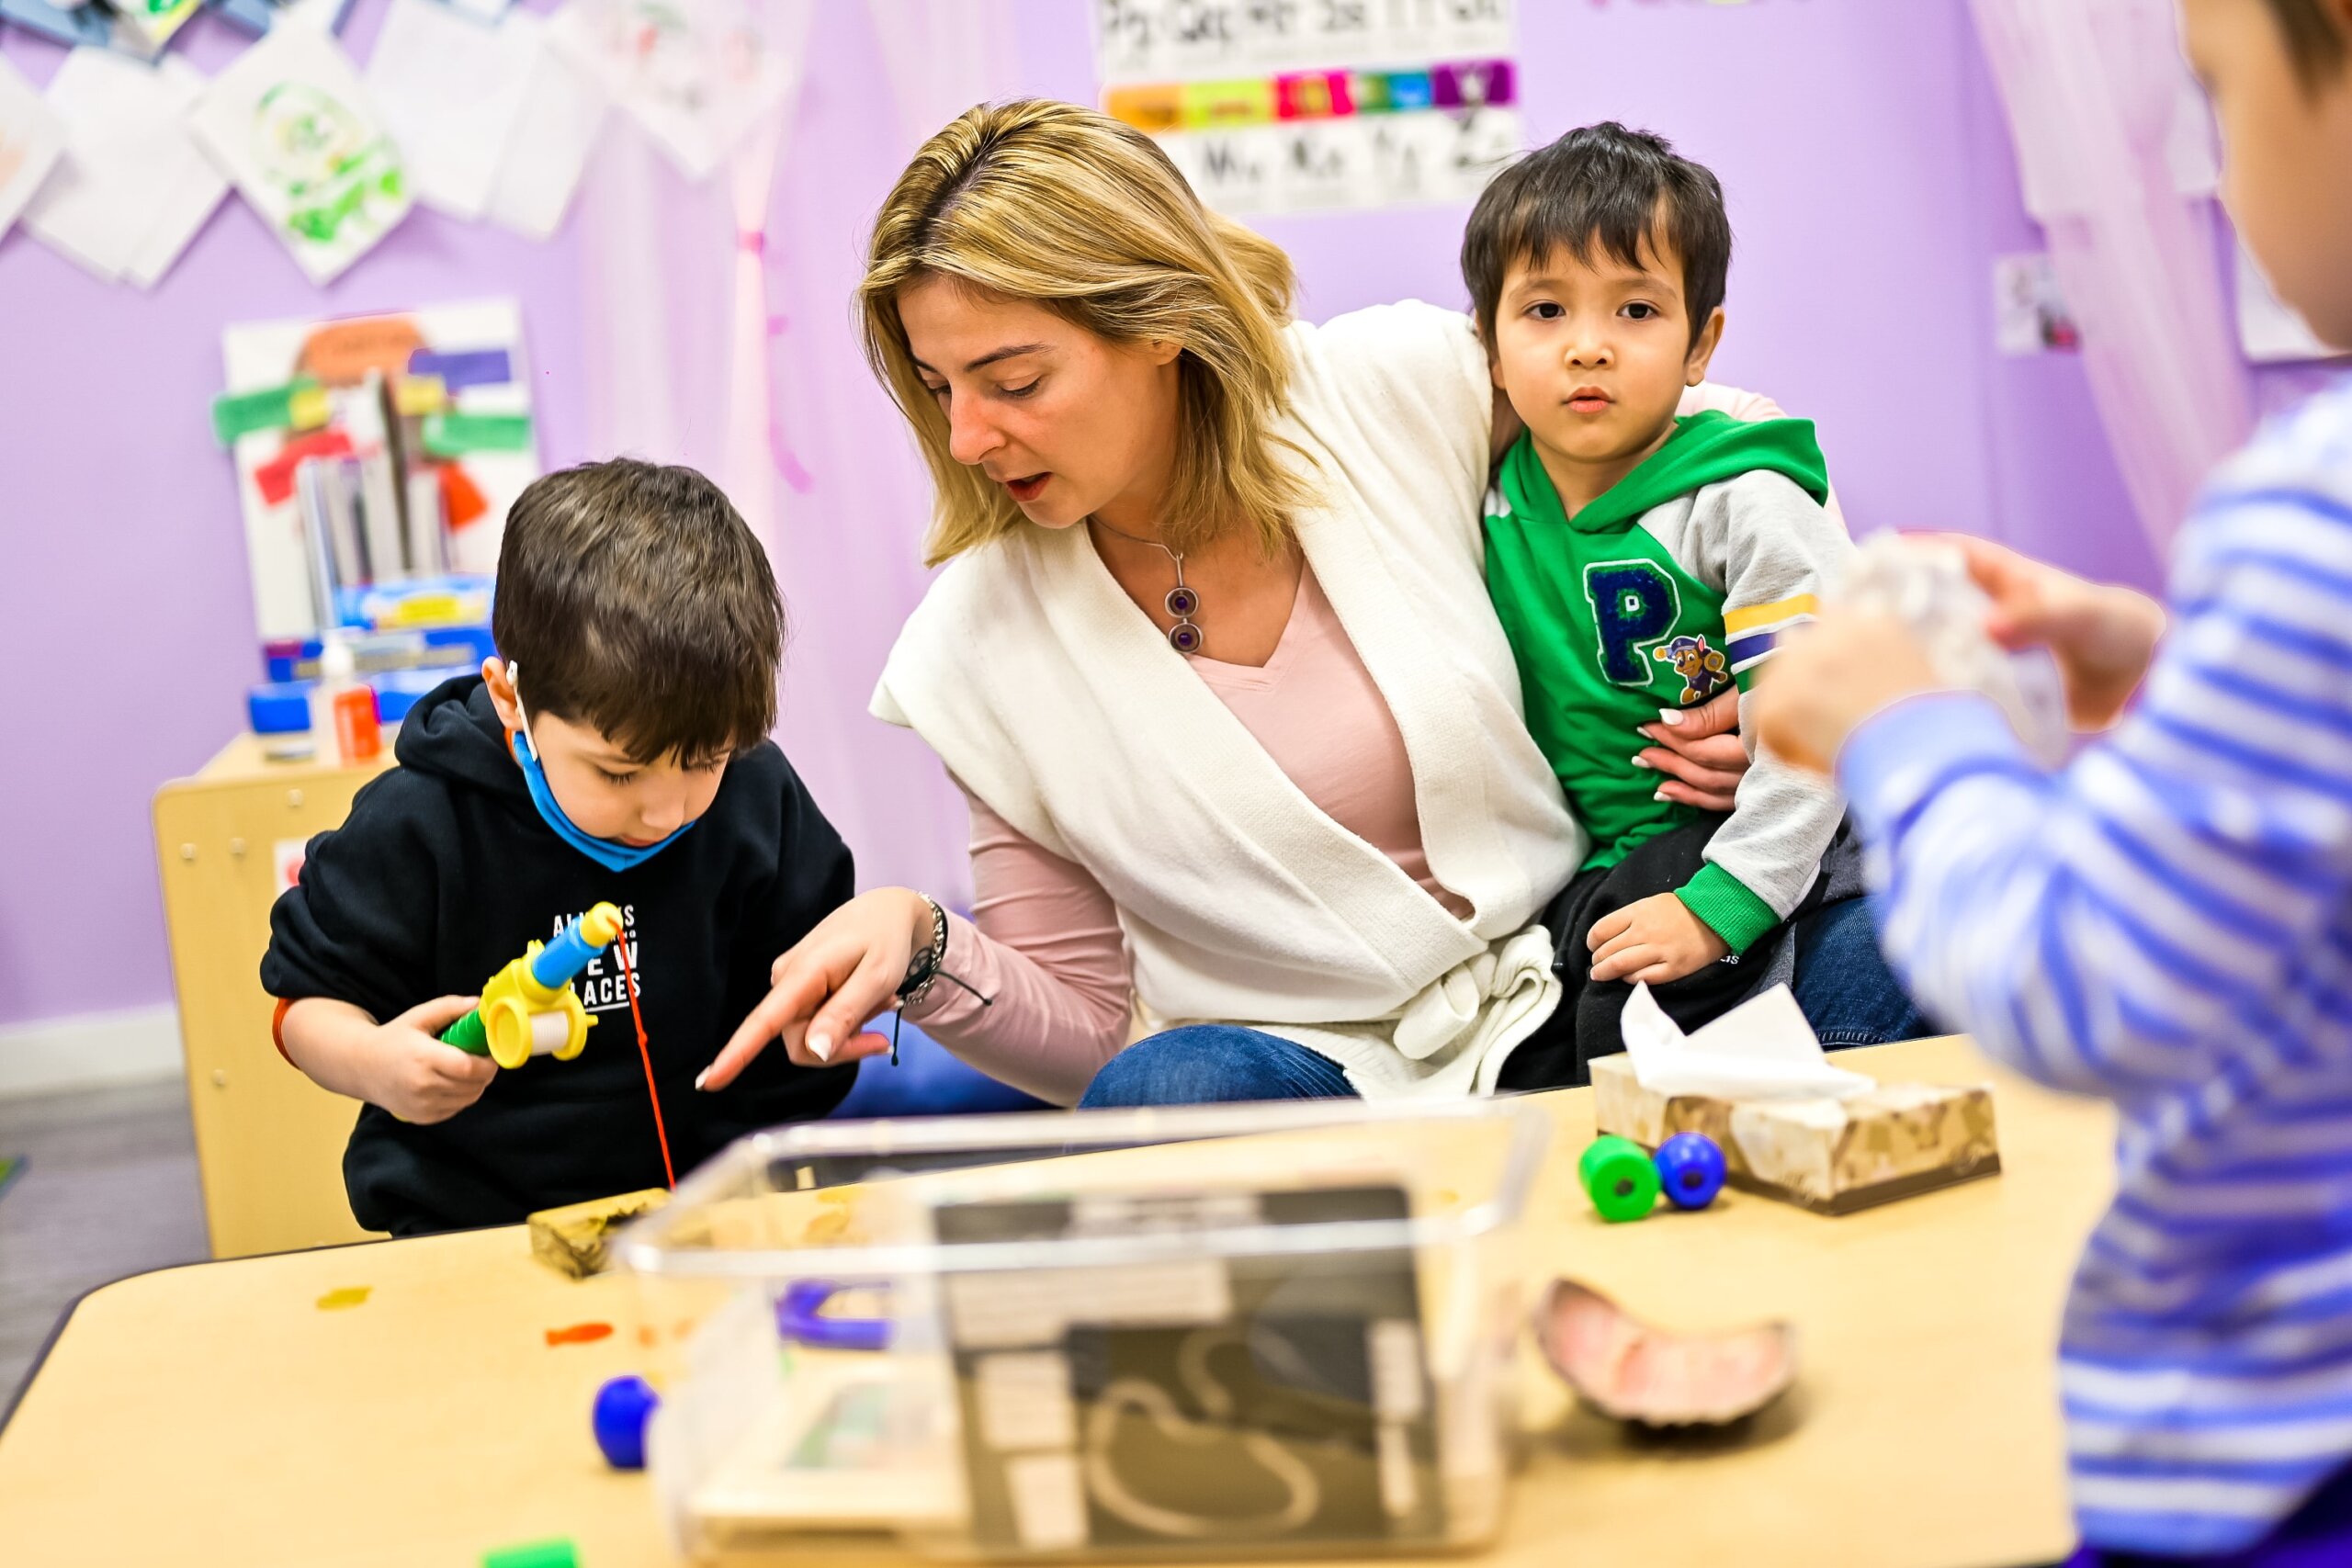 A teacher at Little Scholars Daycare attentively engaging with children during a learning activity.